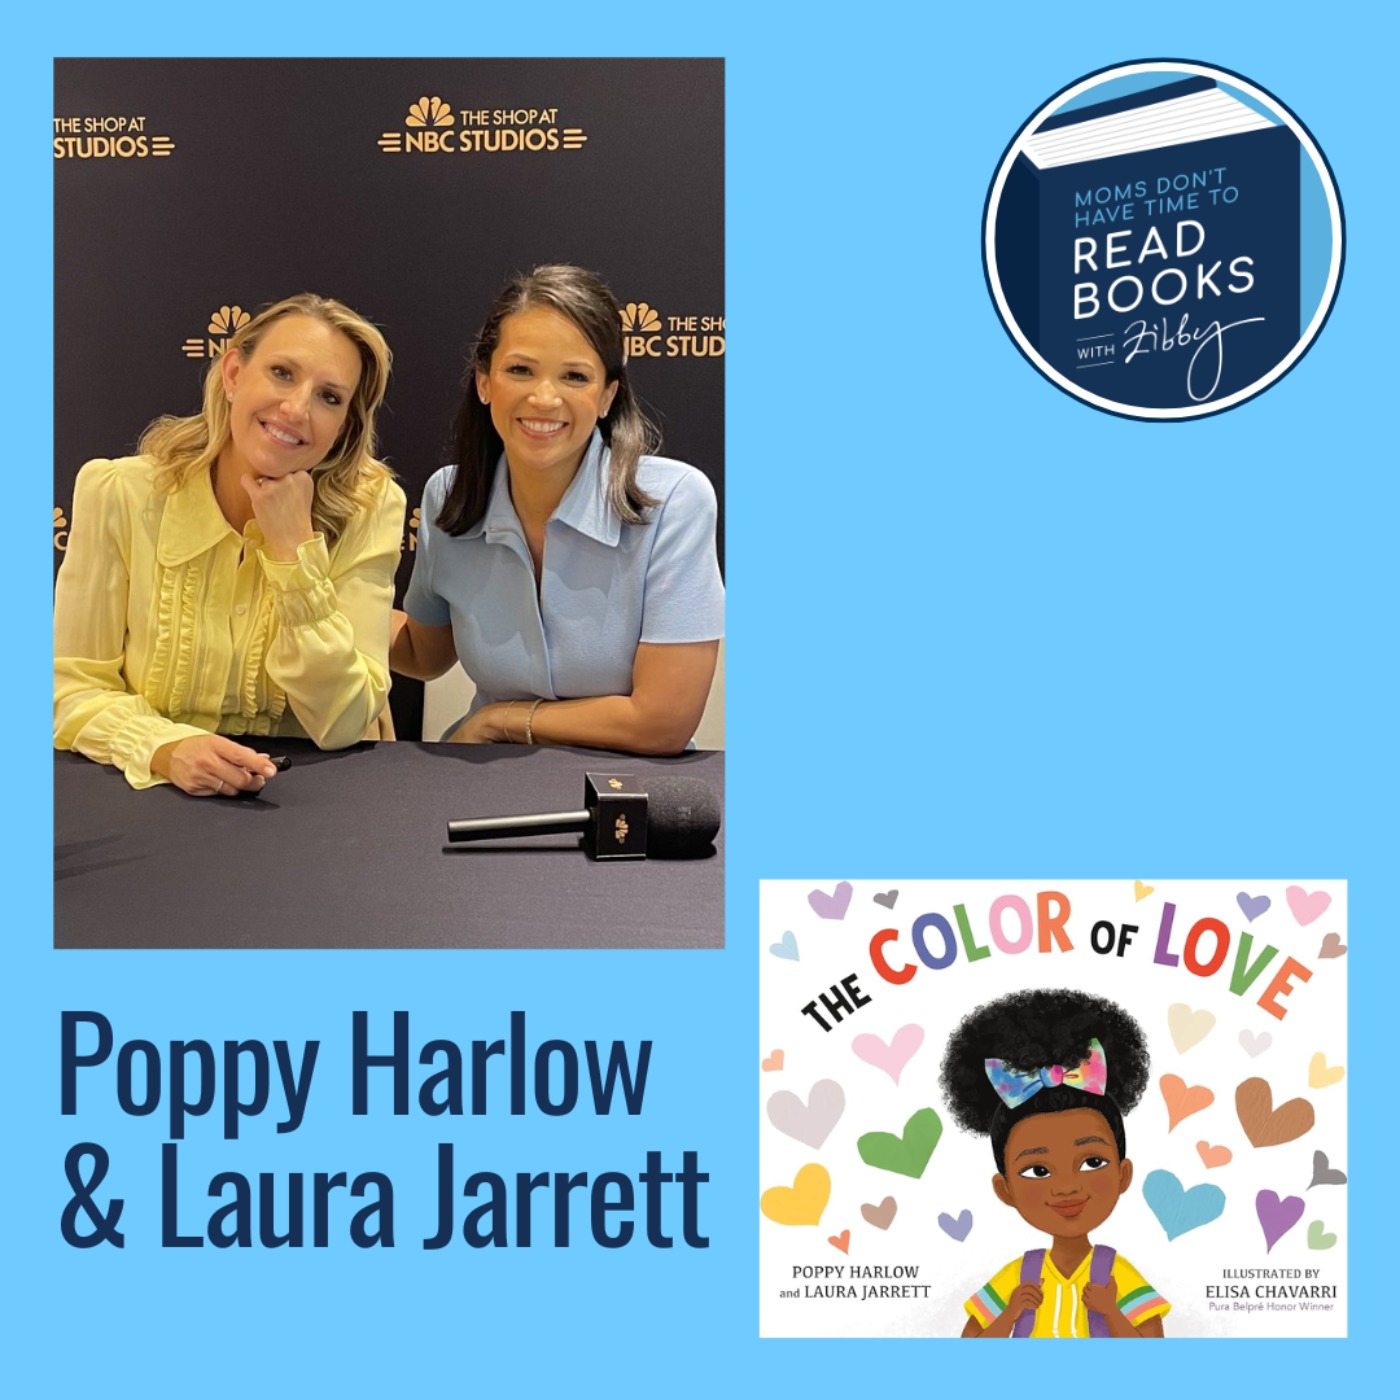 Emmy-nominated journalist Poppy Harlow and Saturday TODAY's Laura Jarrett, THE COLOR OF LOVE